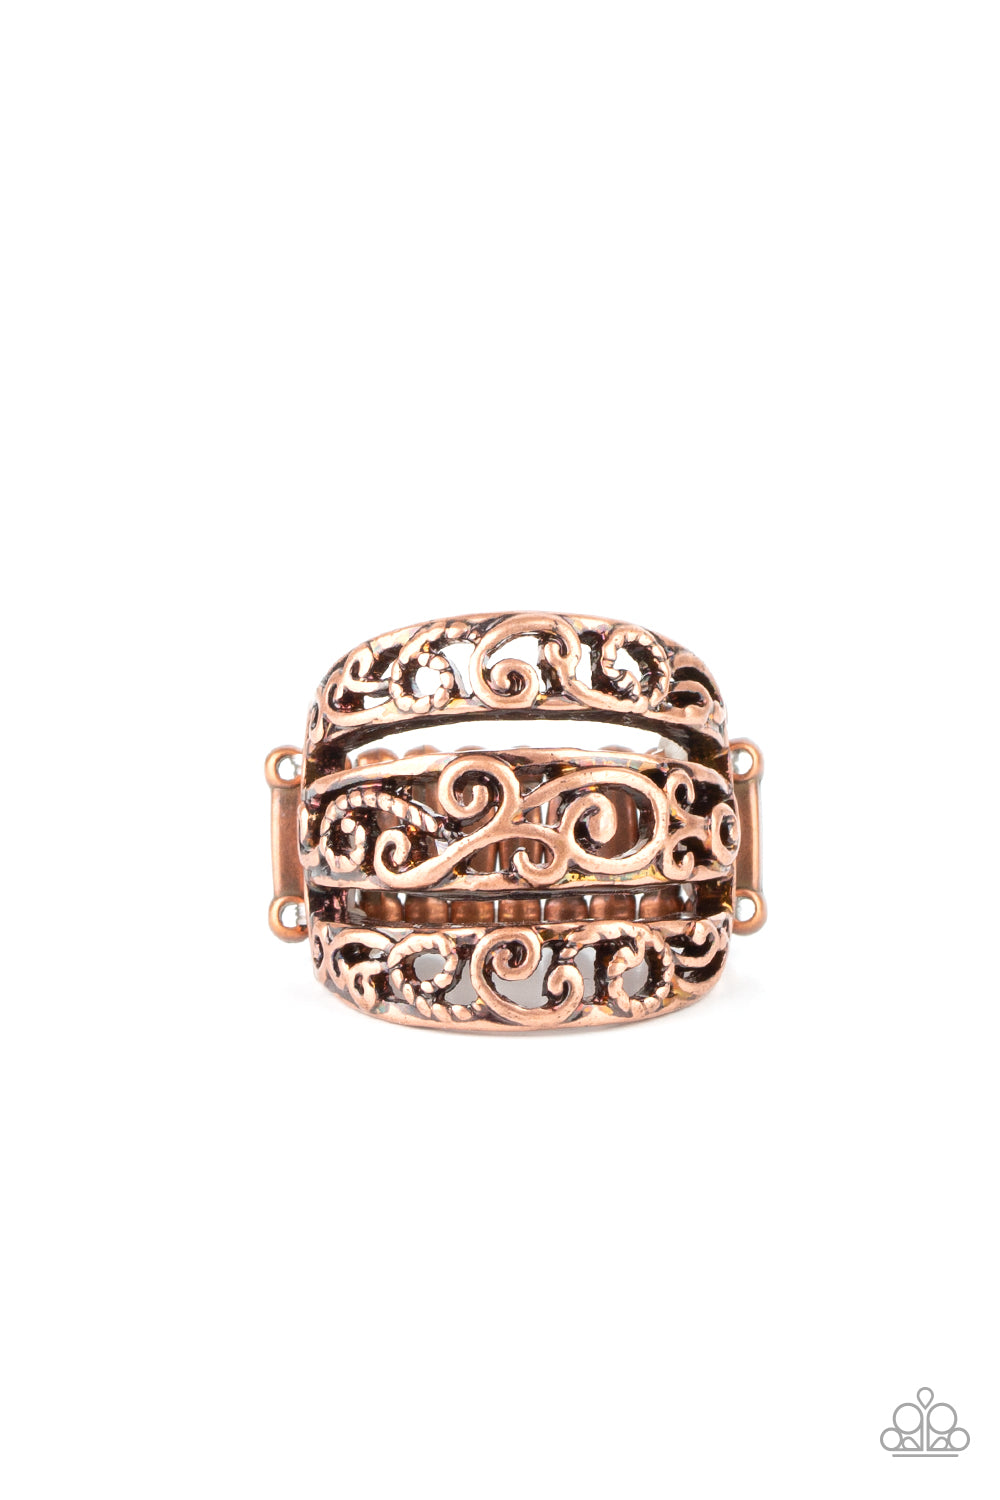 FRILLED To Be Here Copper Ring - Paparazzi